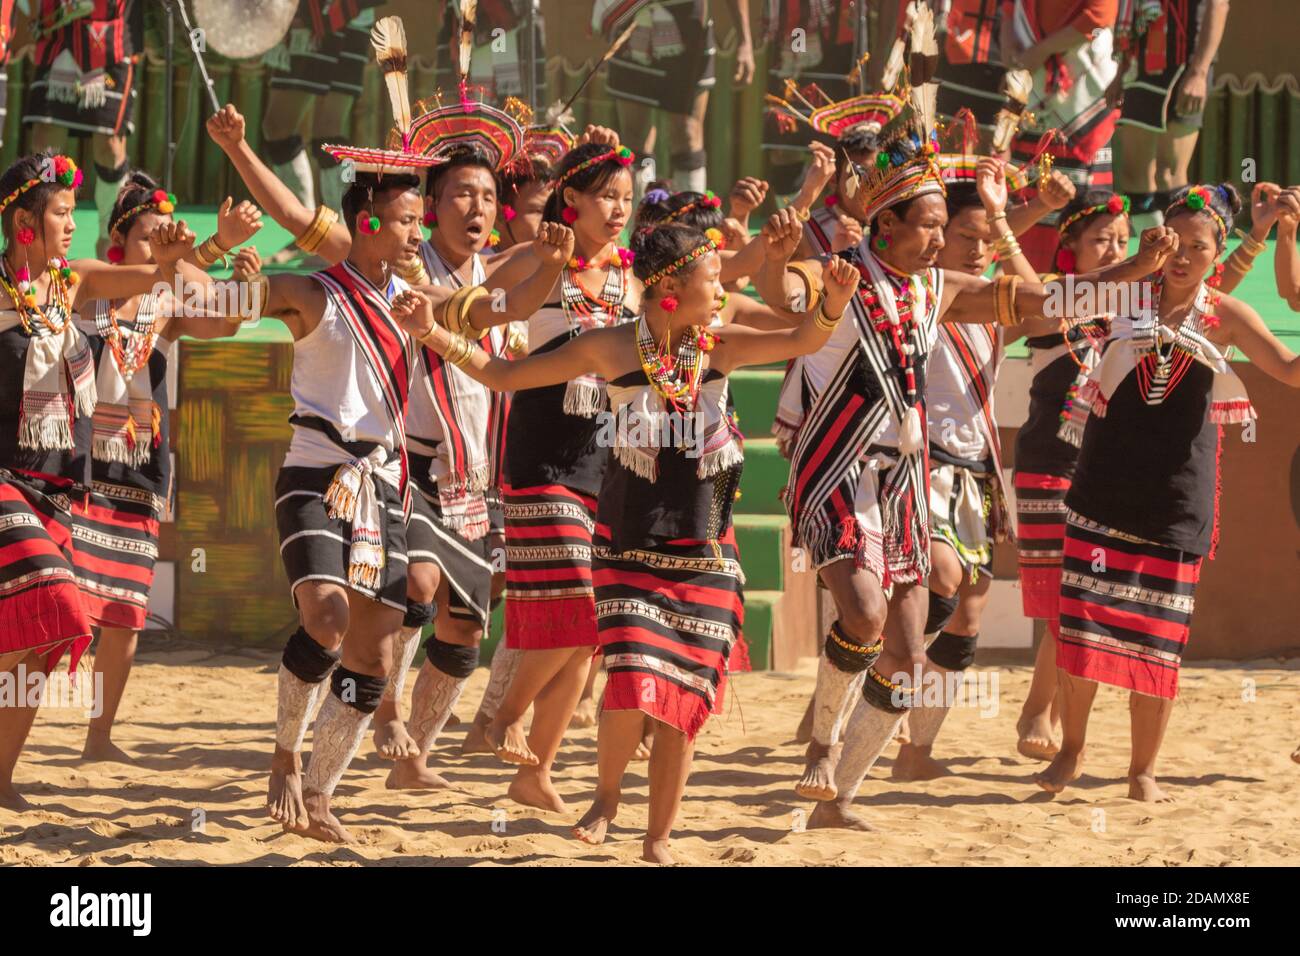 Group of naga tribesmen and women  dressed in their traditional attire dancing during Hornbill festival in Nagaland India on 4 December 2016 Stock Photo